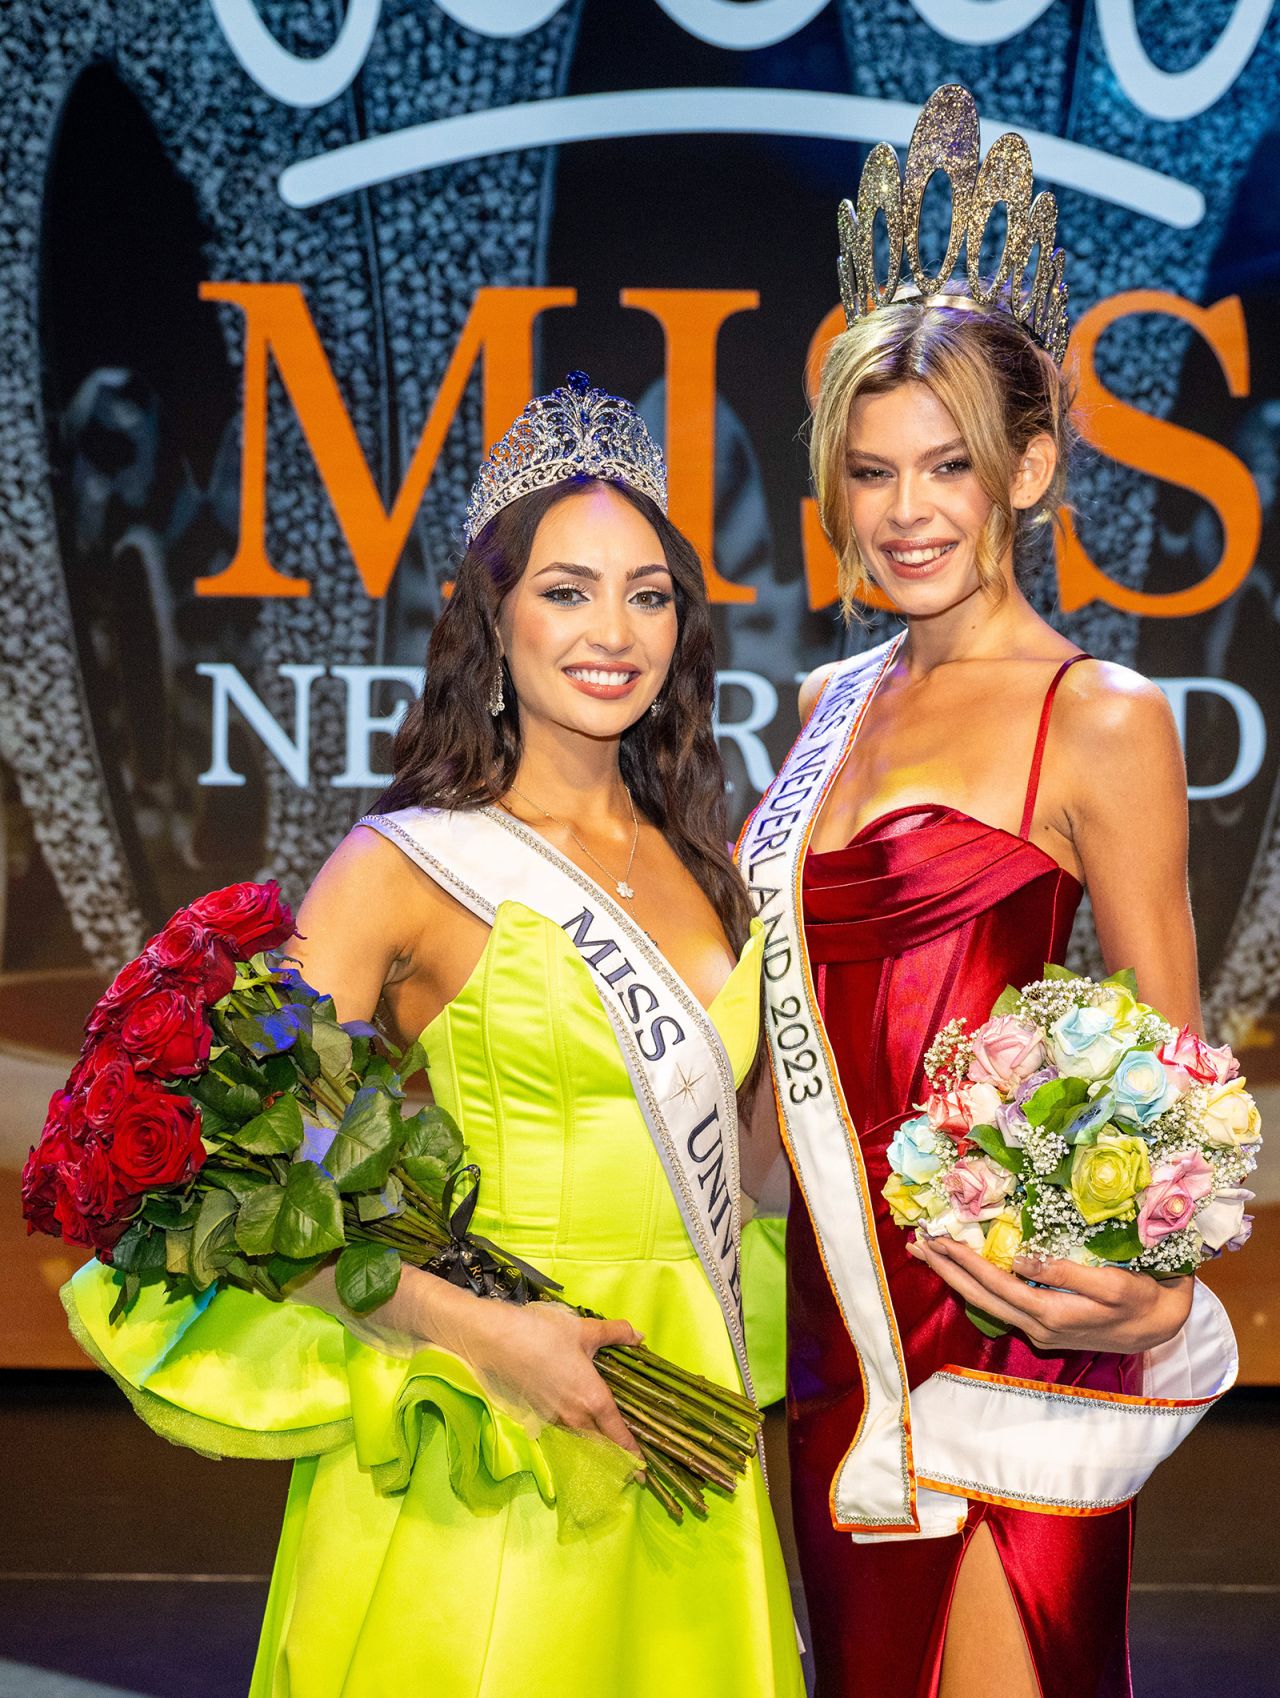 Miss Netherlands challenger leaves a mark on the world as first trans